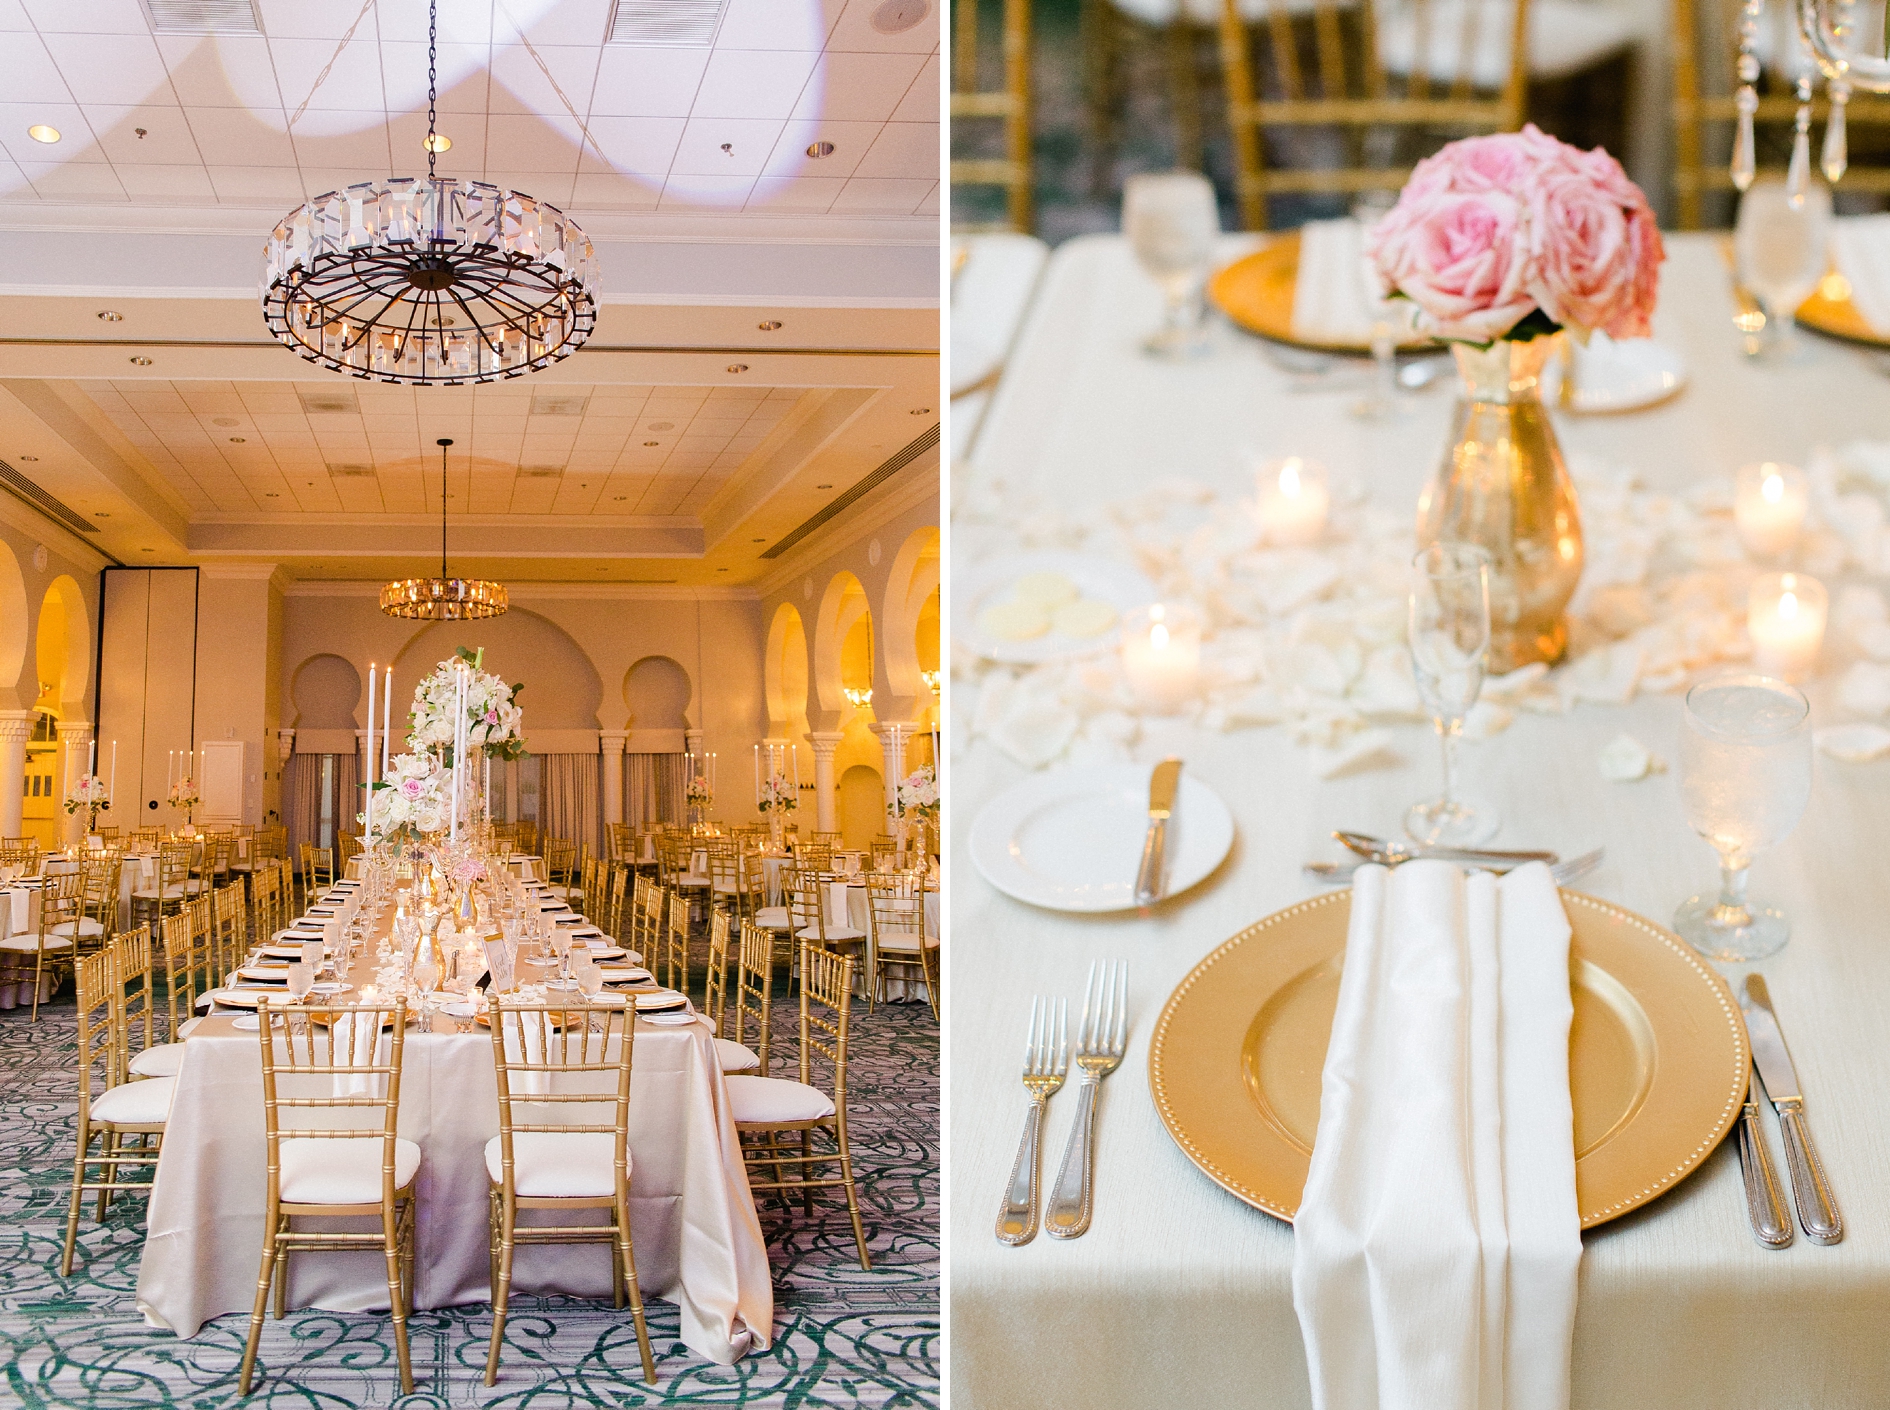 The Vinoy Renaissance Wedding | Sterling & Claire | © Ailyn La Torre Photography 2017